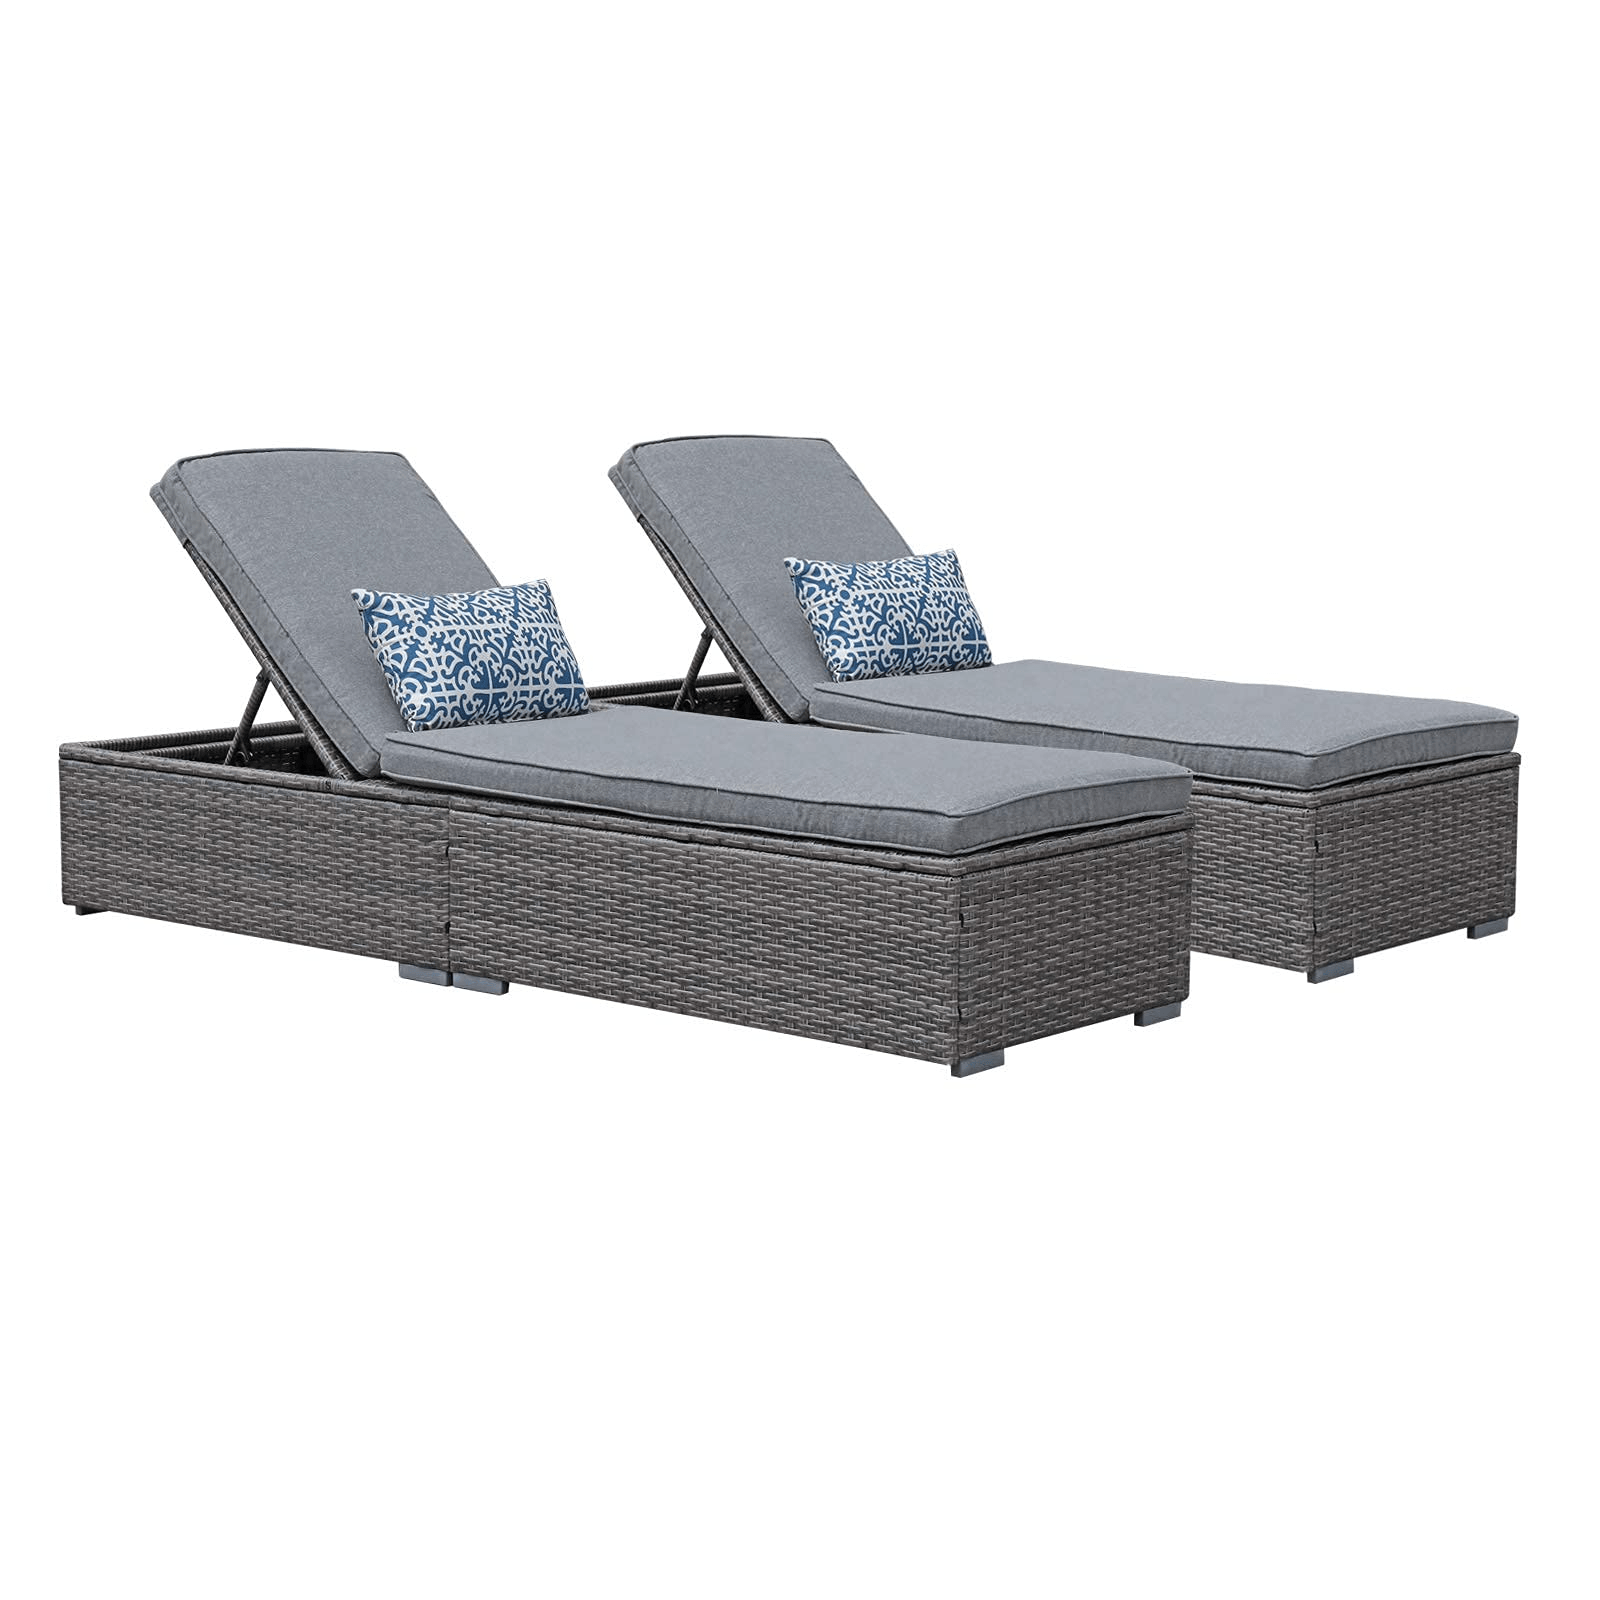 2pcs Patio Lounge Chairs Wicker Outdoor Loungers with Grey Cushions, Rectangle Shape | Orange-Casual